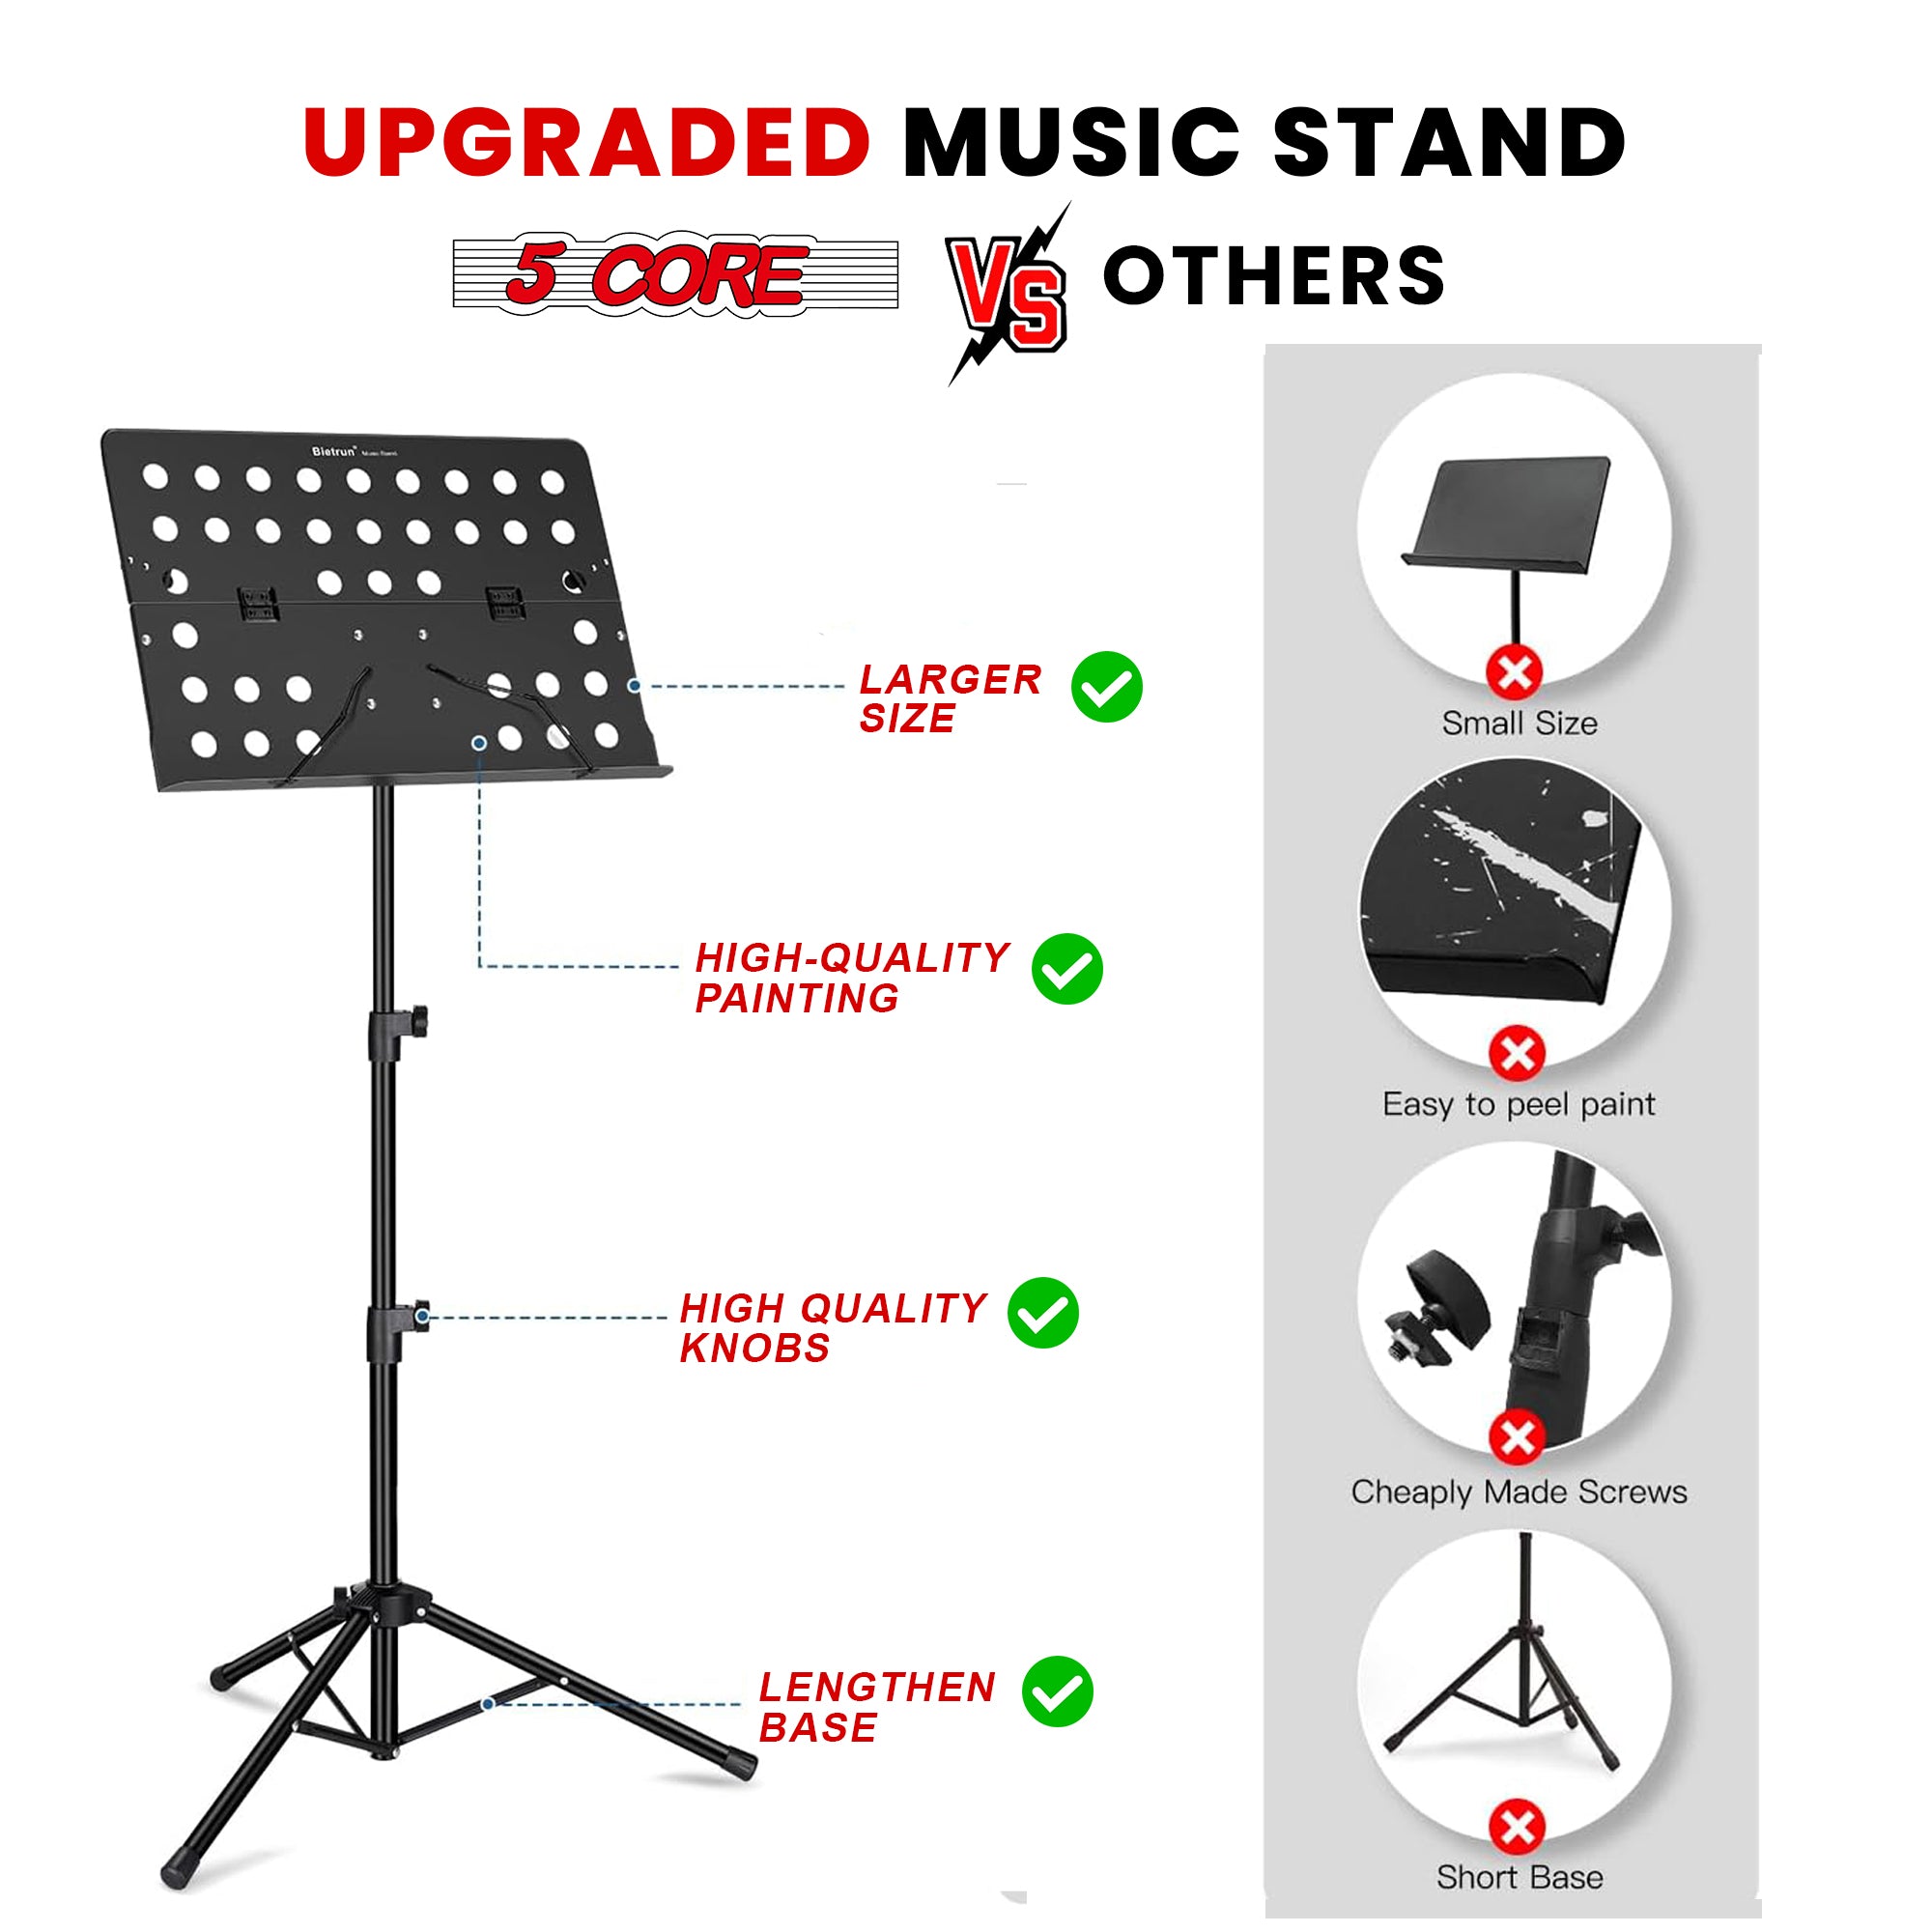 upgraded music stand